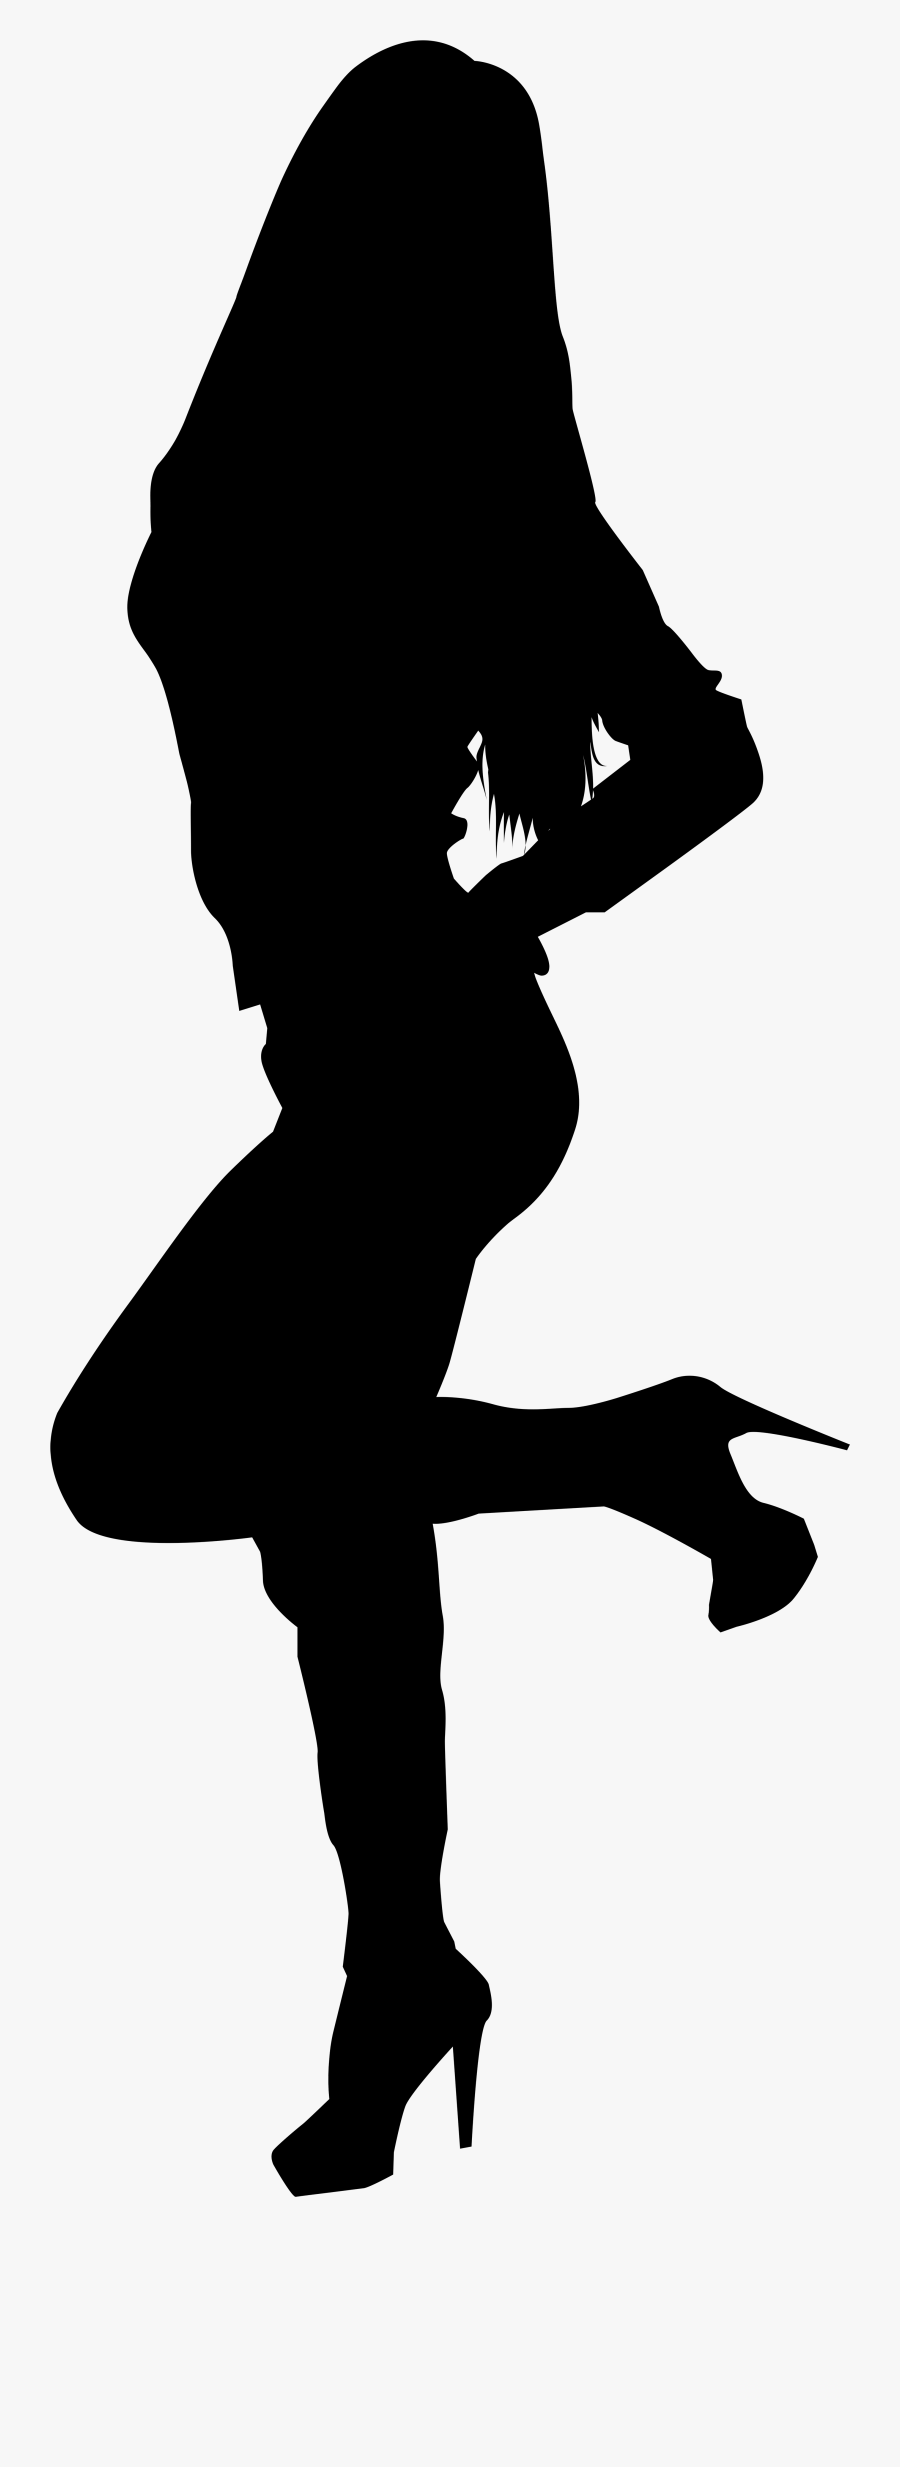 Sexy Lady Silhouette Png Transparent Clip Art Image - Sexy Woman Silhouette Png, Transparent Clipart